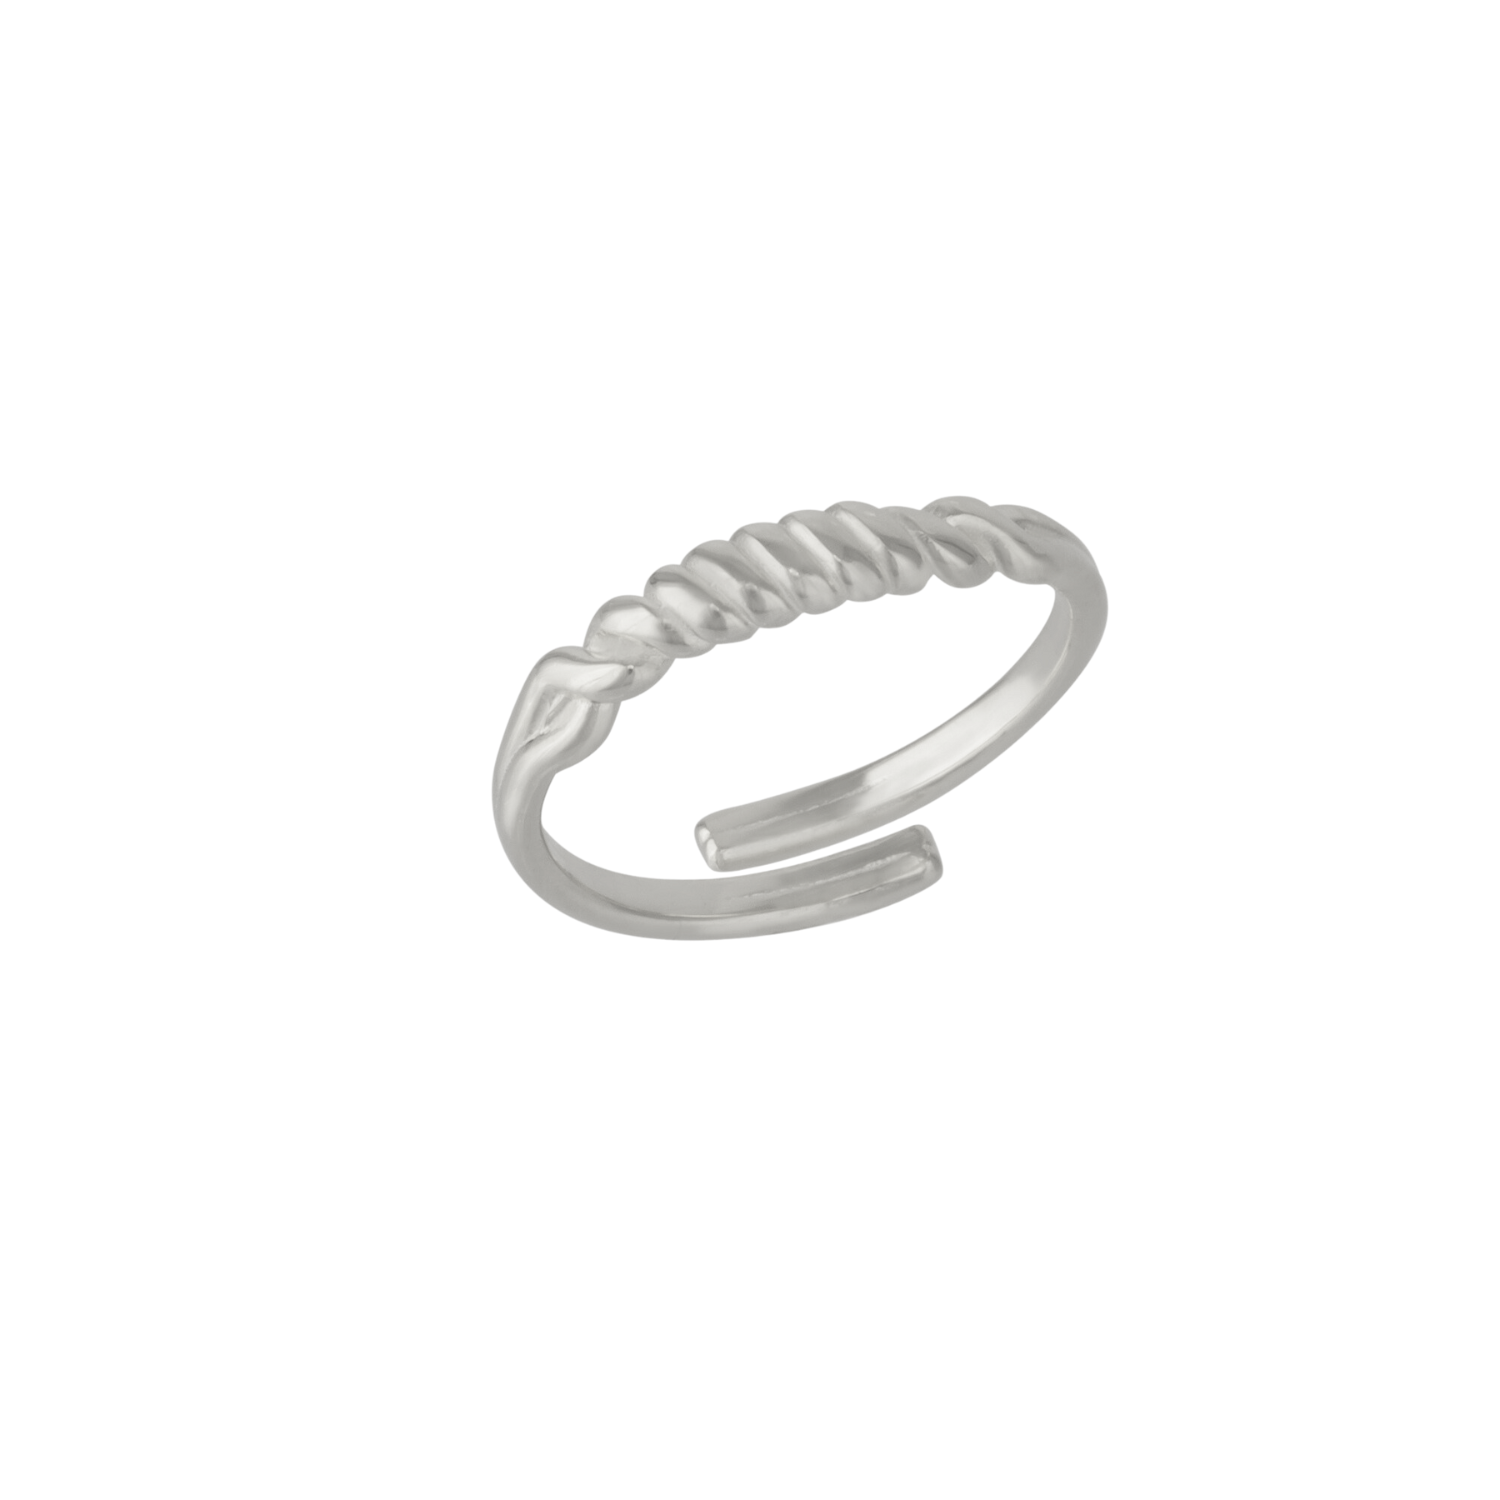 Twisted Screw Spring Sterling Silver Ring